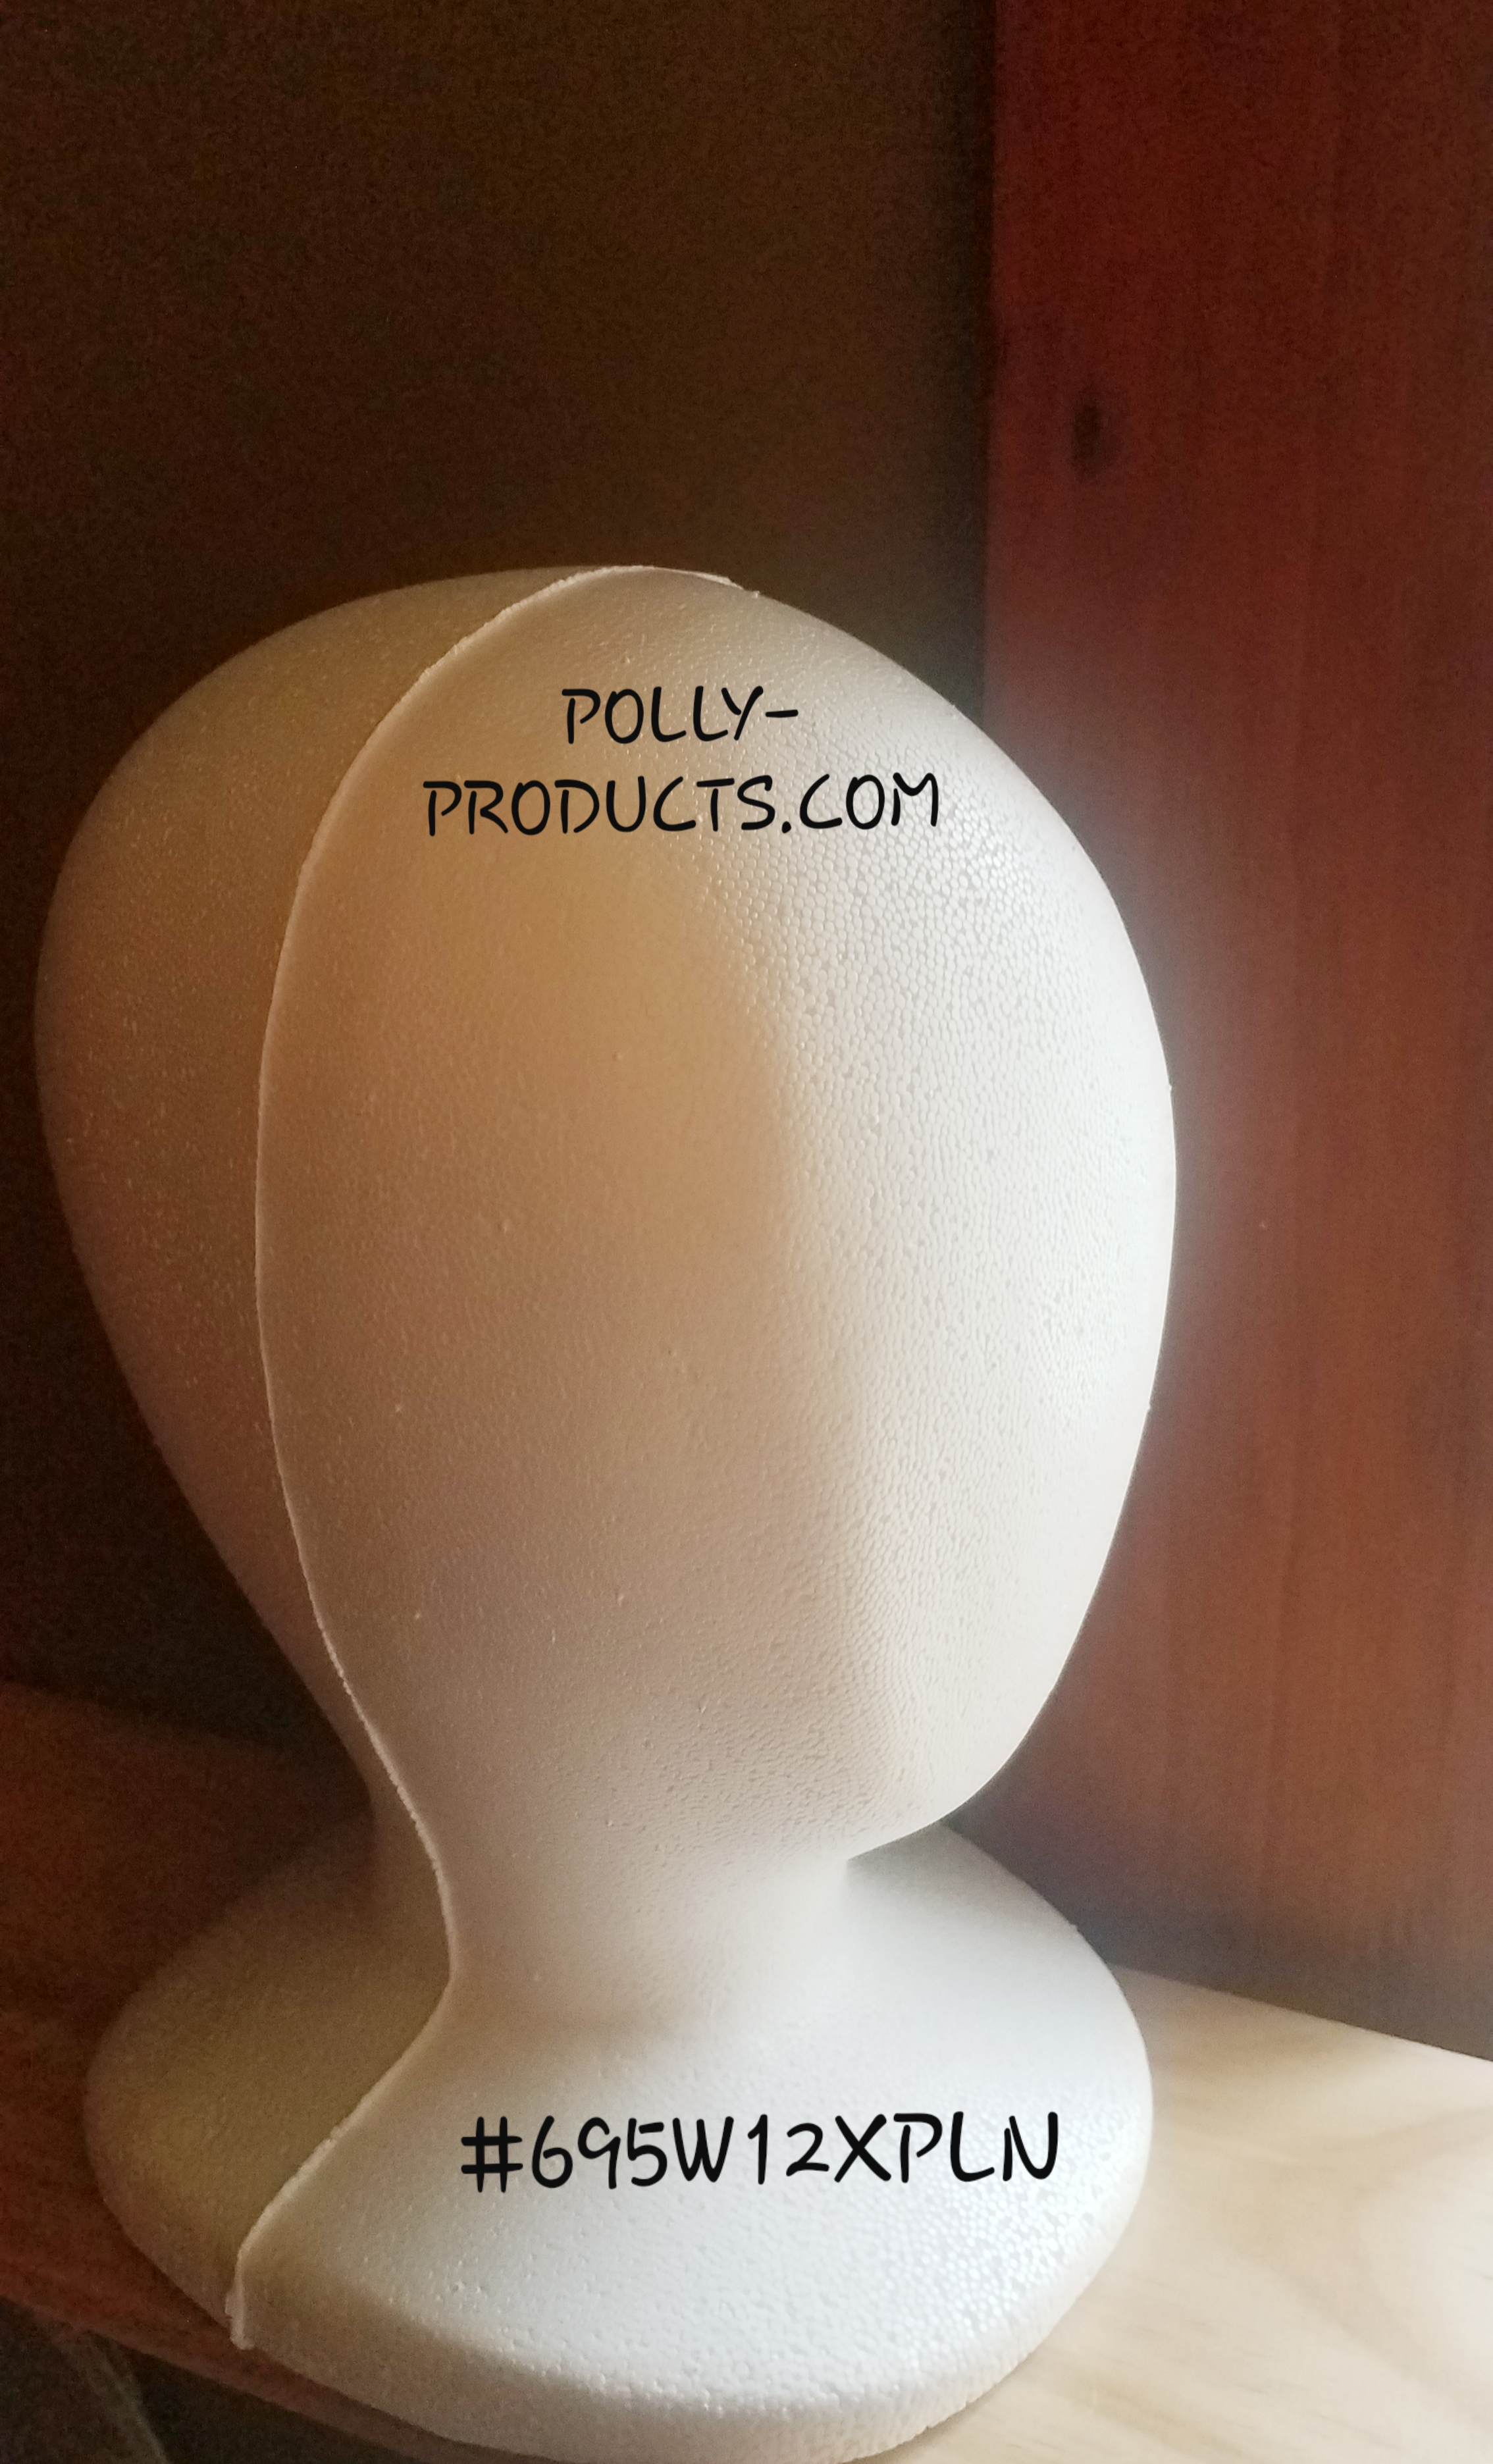 #695W12XPLN 10"H BLANK HEAD FORM-WIDE BASE BY POLLY PRODUCTS COMPANY